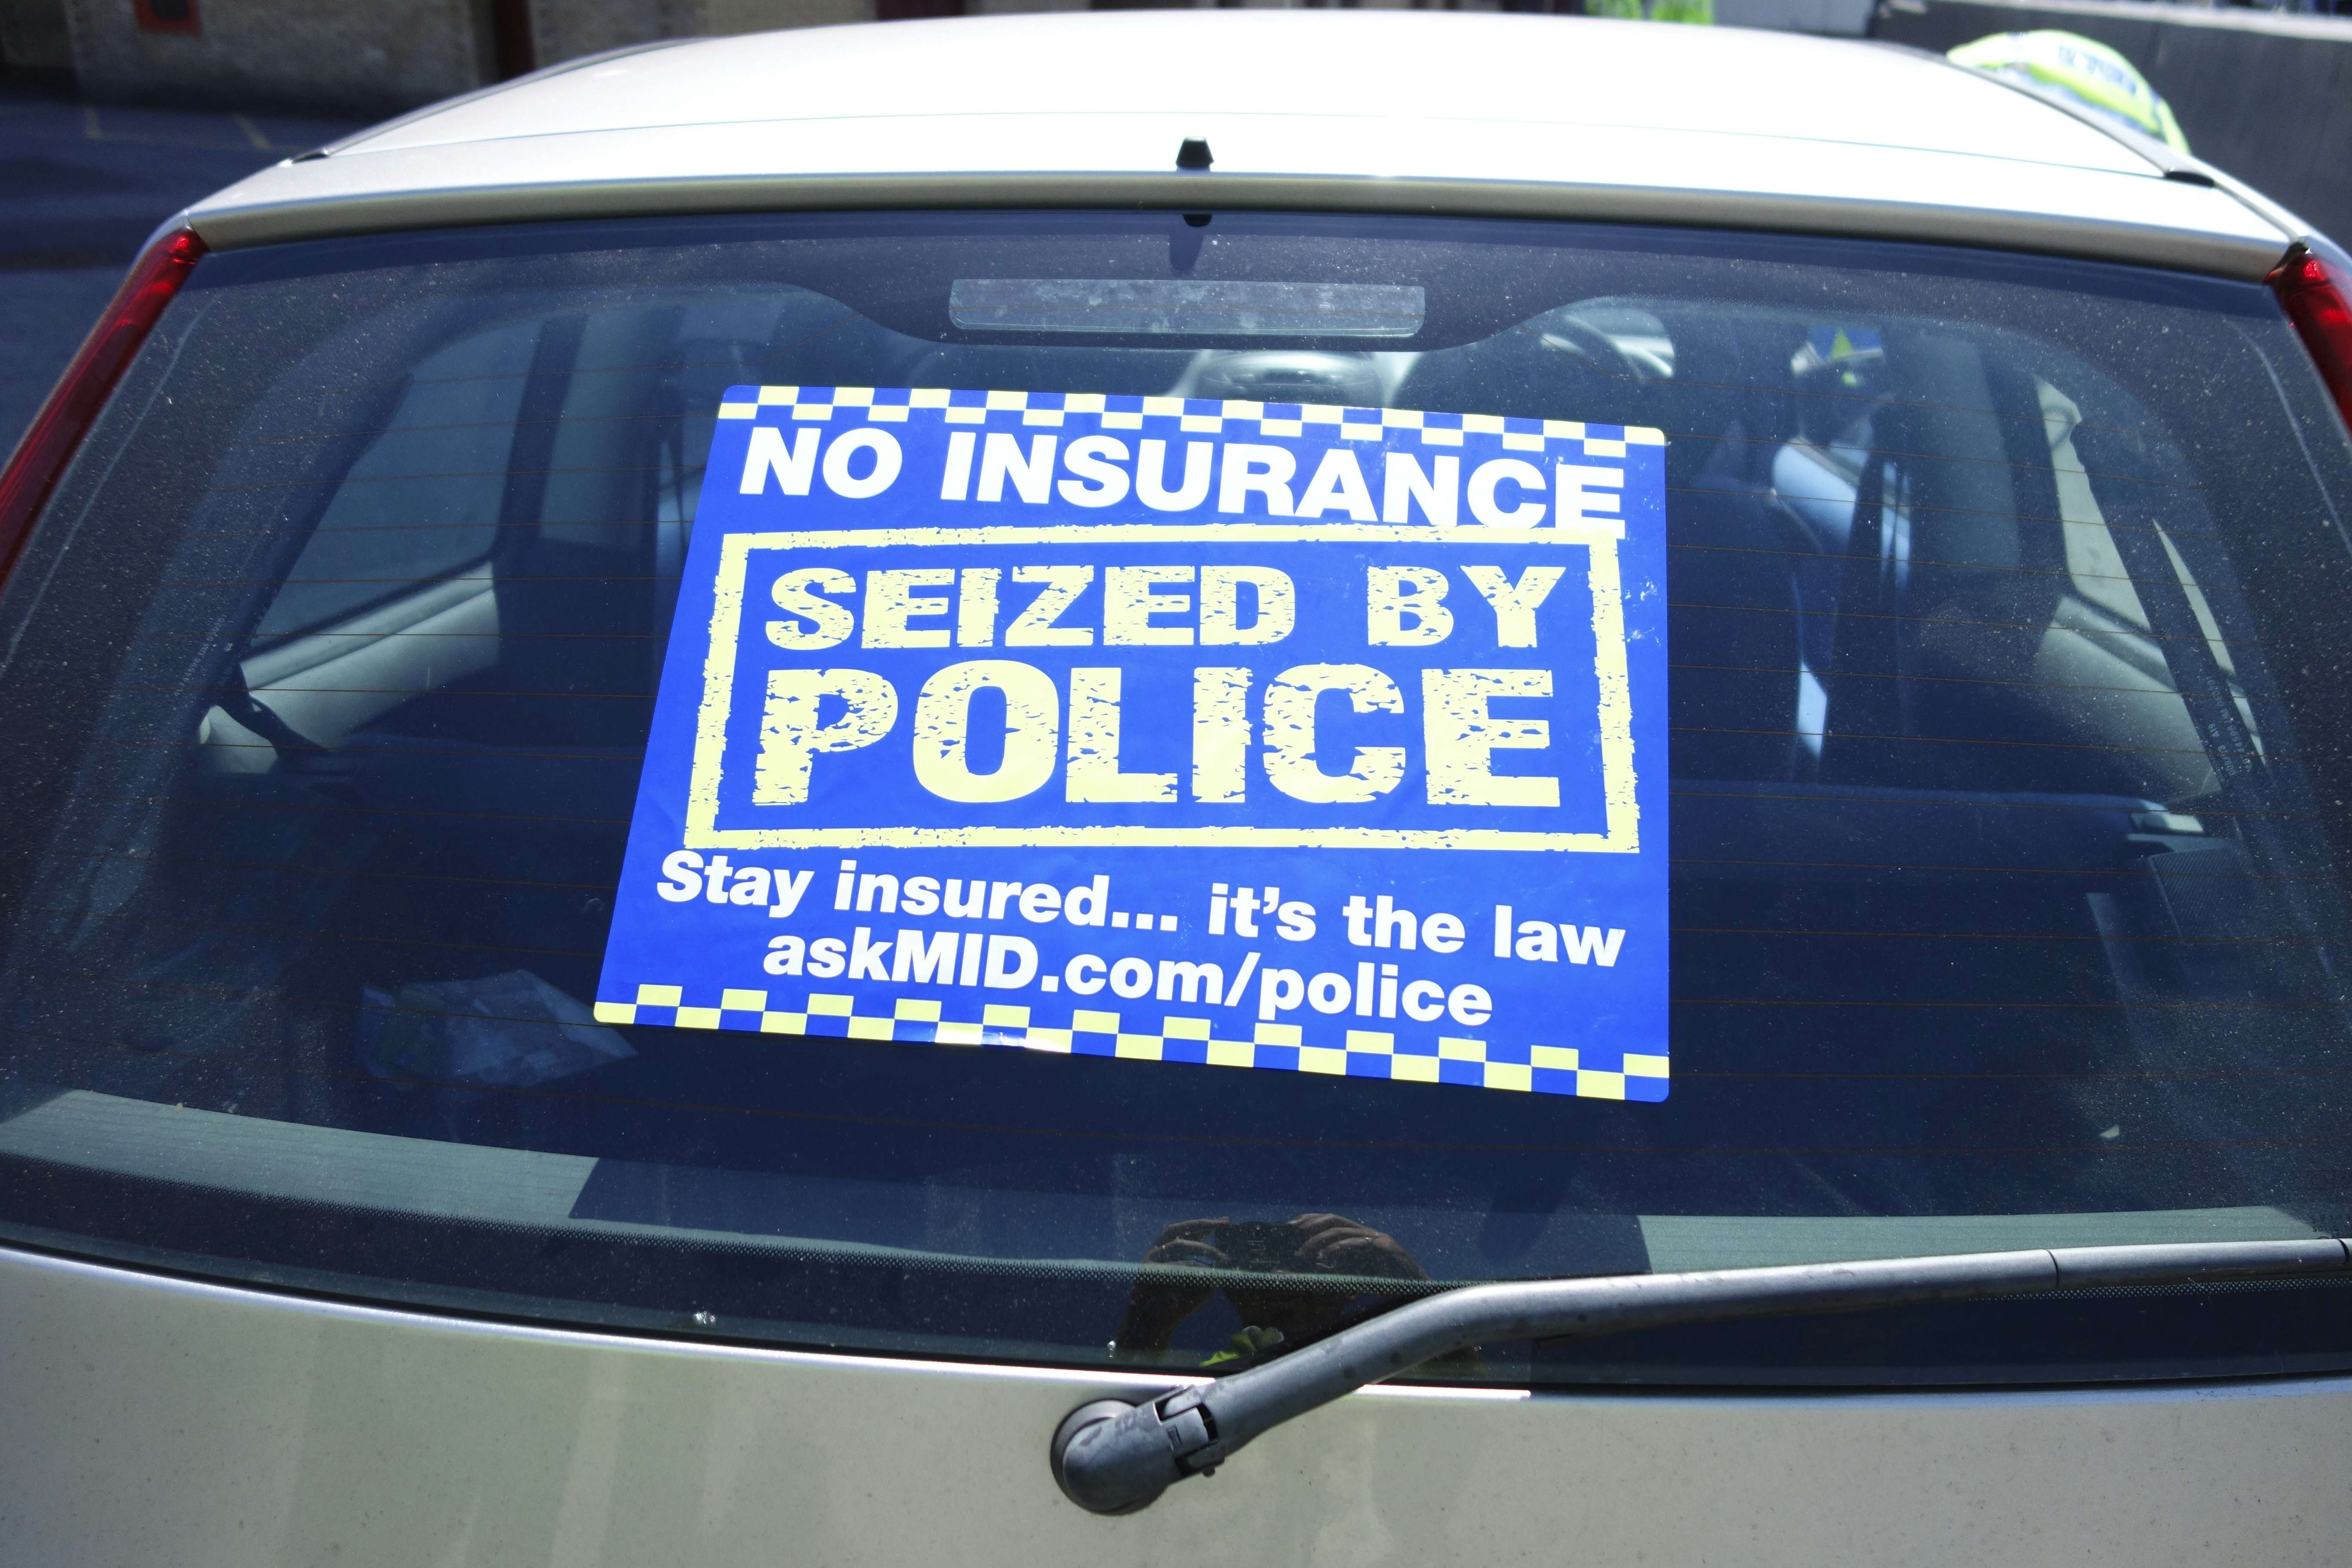 Police no-insurance seizure notice on a car's back window. 